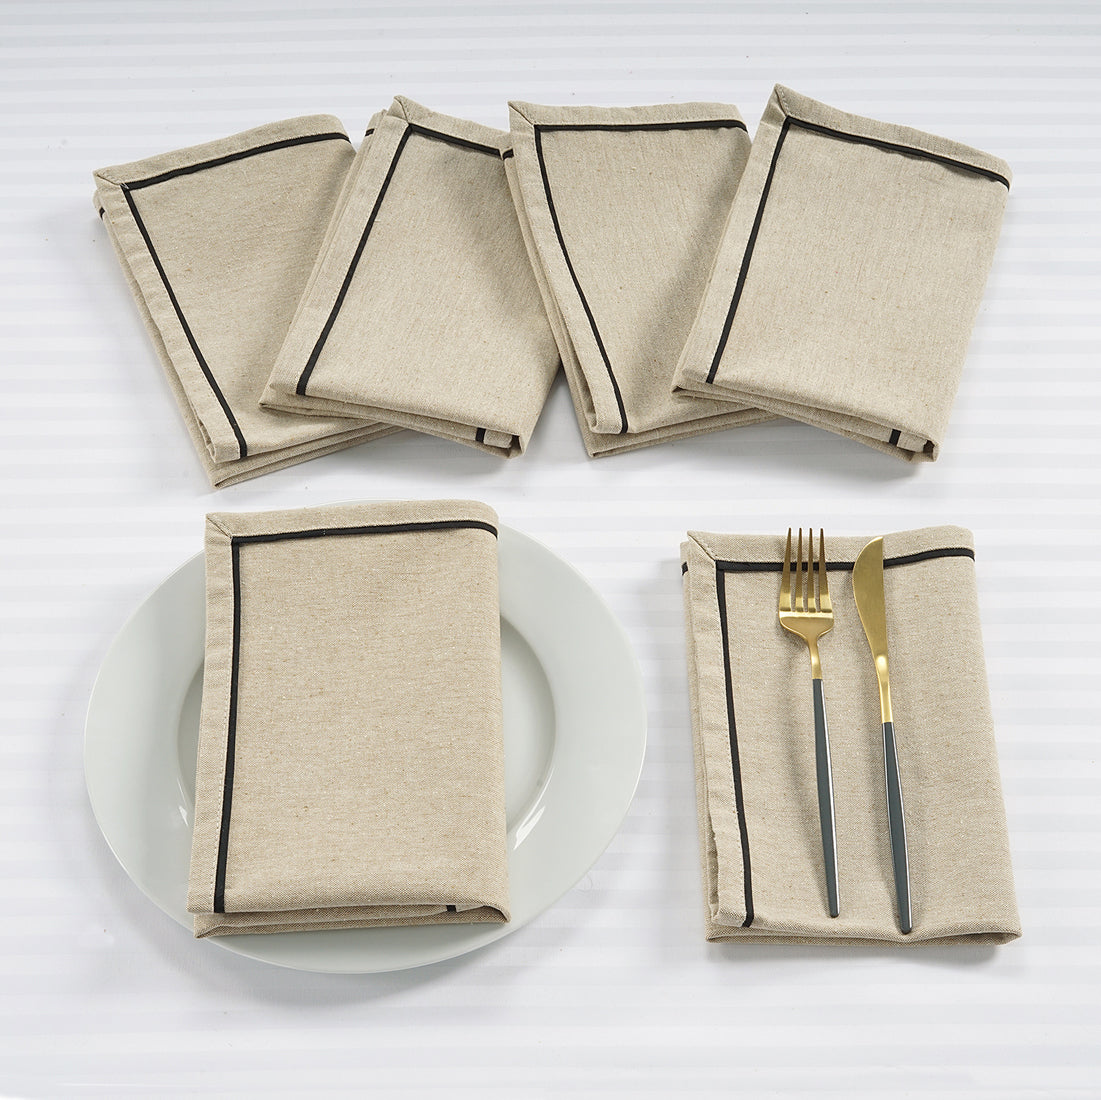 Soft Natural Brown Woven Cotton Plain Napkins Set online in India